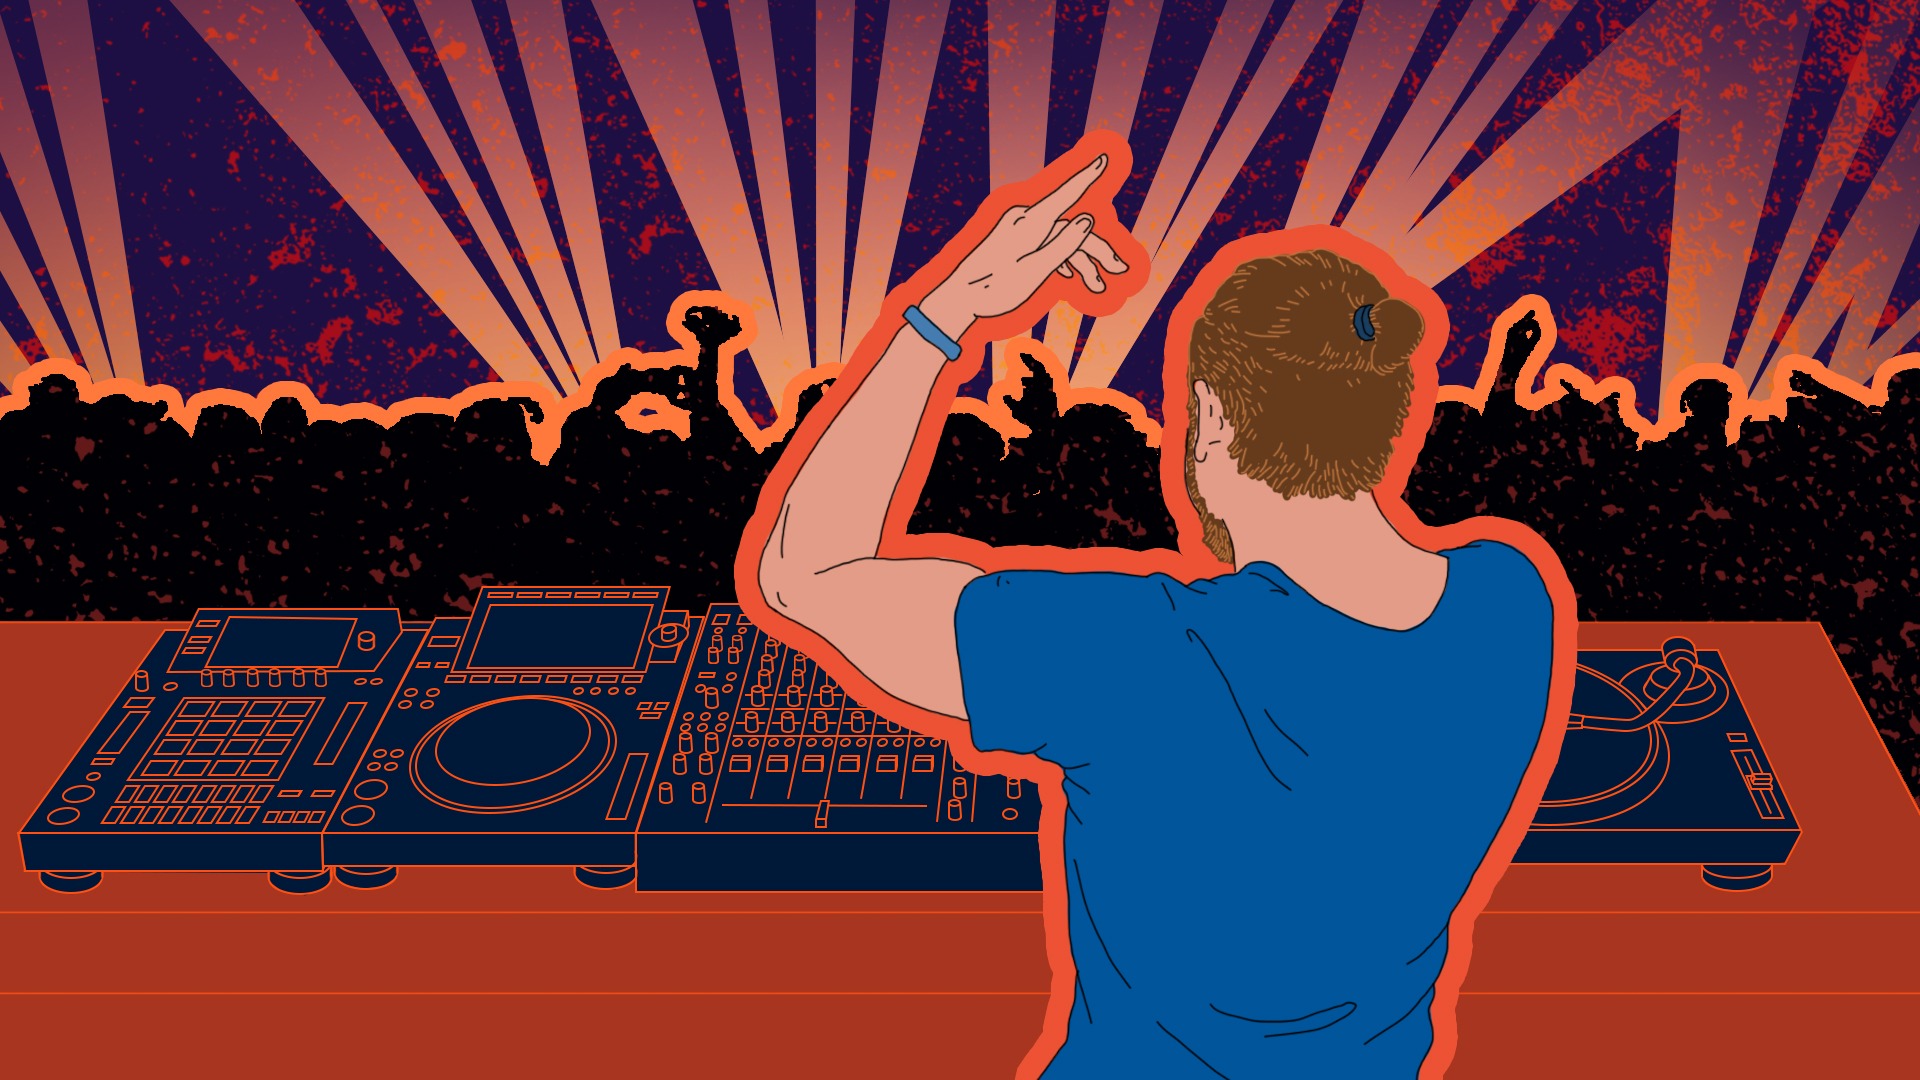 Illustration of Andrew Pololos DJing at an event.